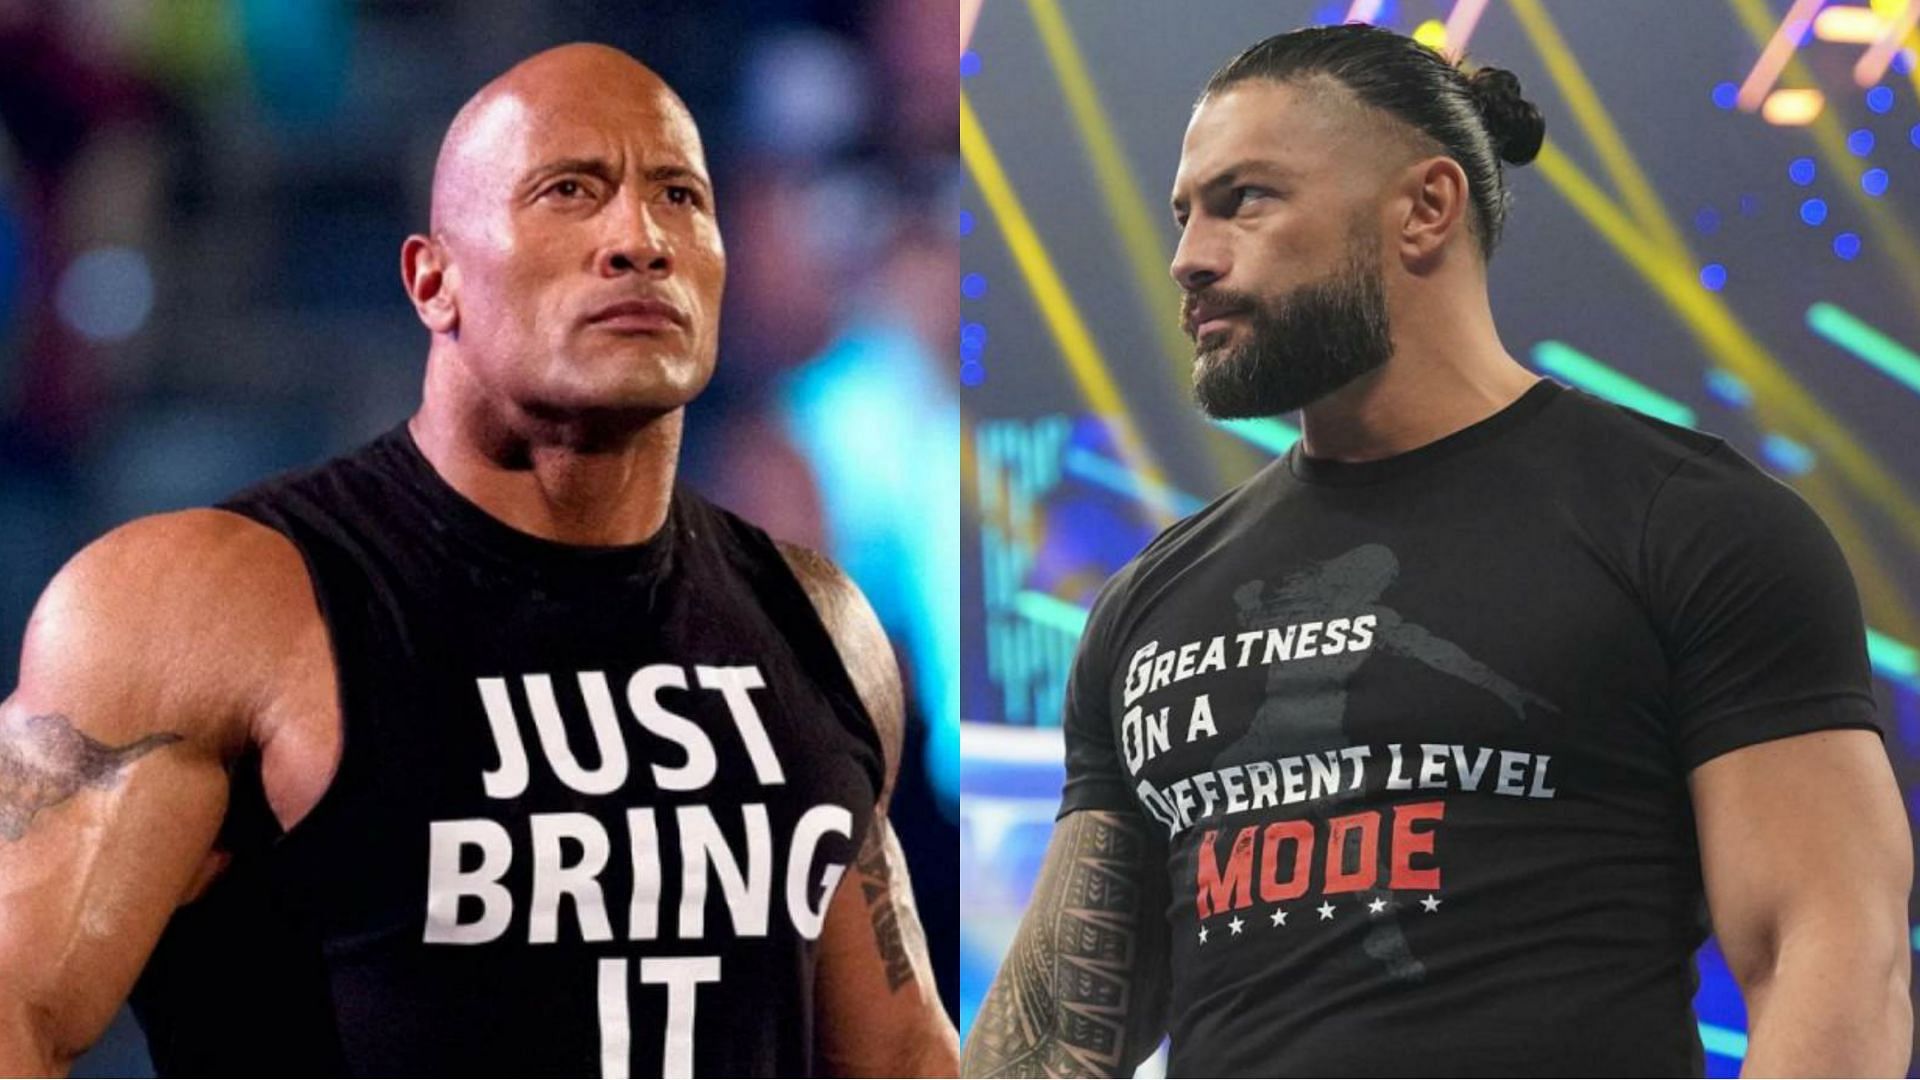 The Rock vs. Roman Reigns - The ultimate WWE dream match